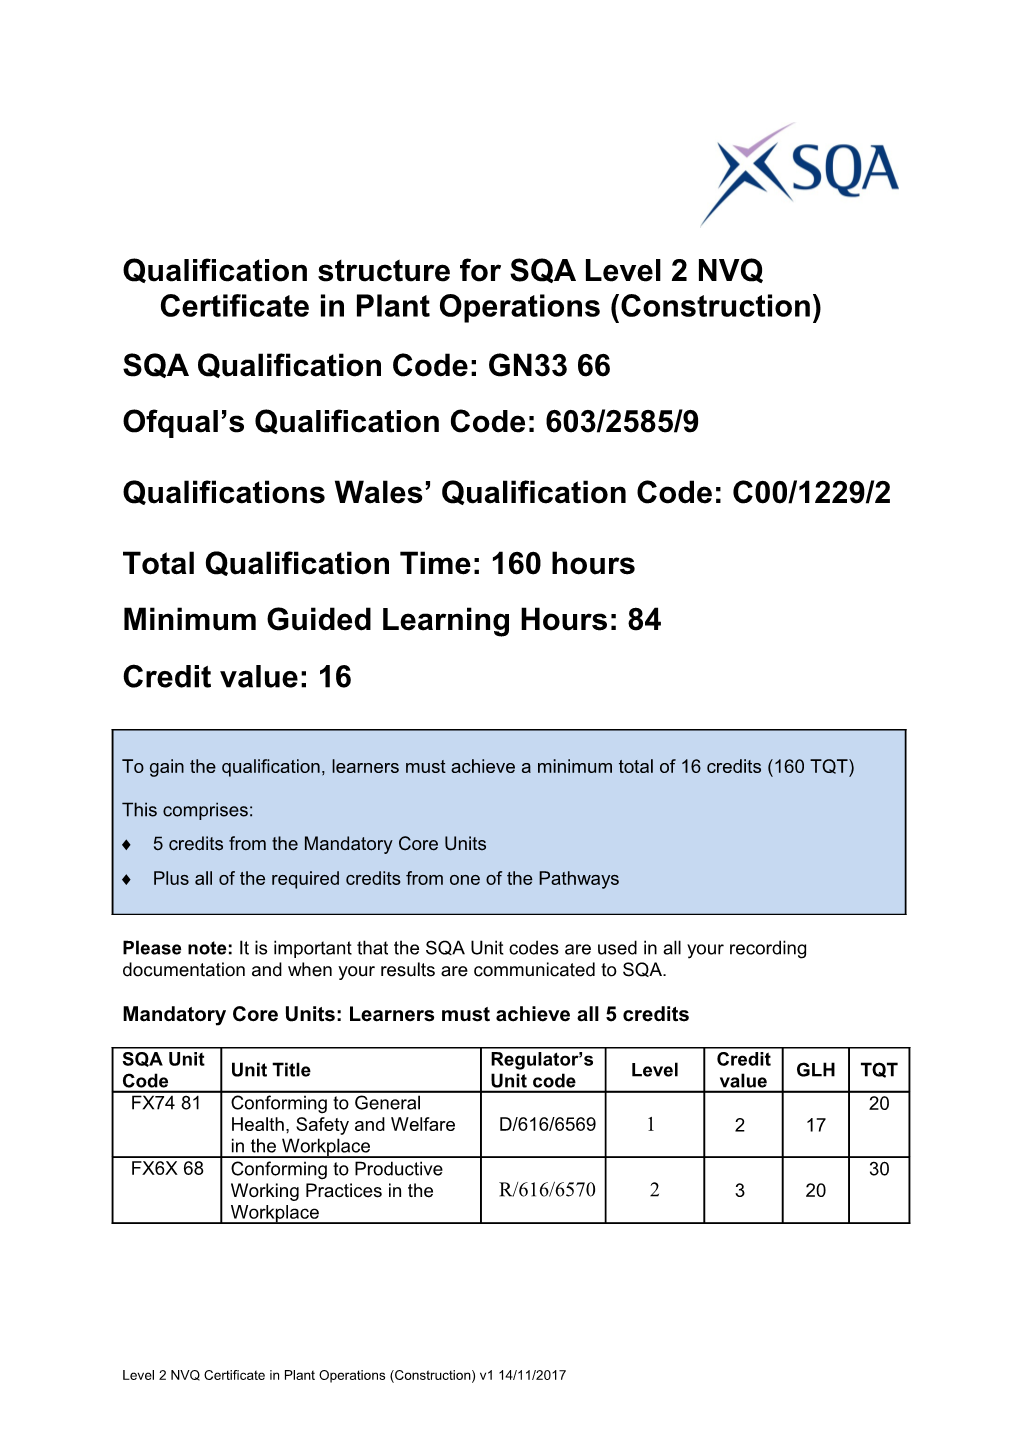 Qualification Structure for SQA Level 2NVQ Certificateinplant Operations (Construction)